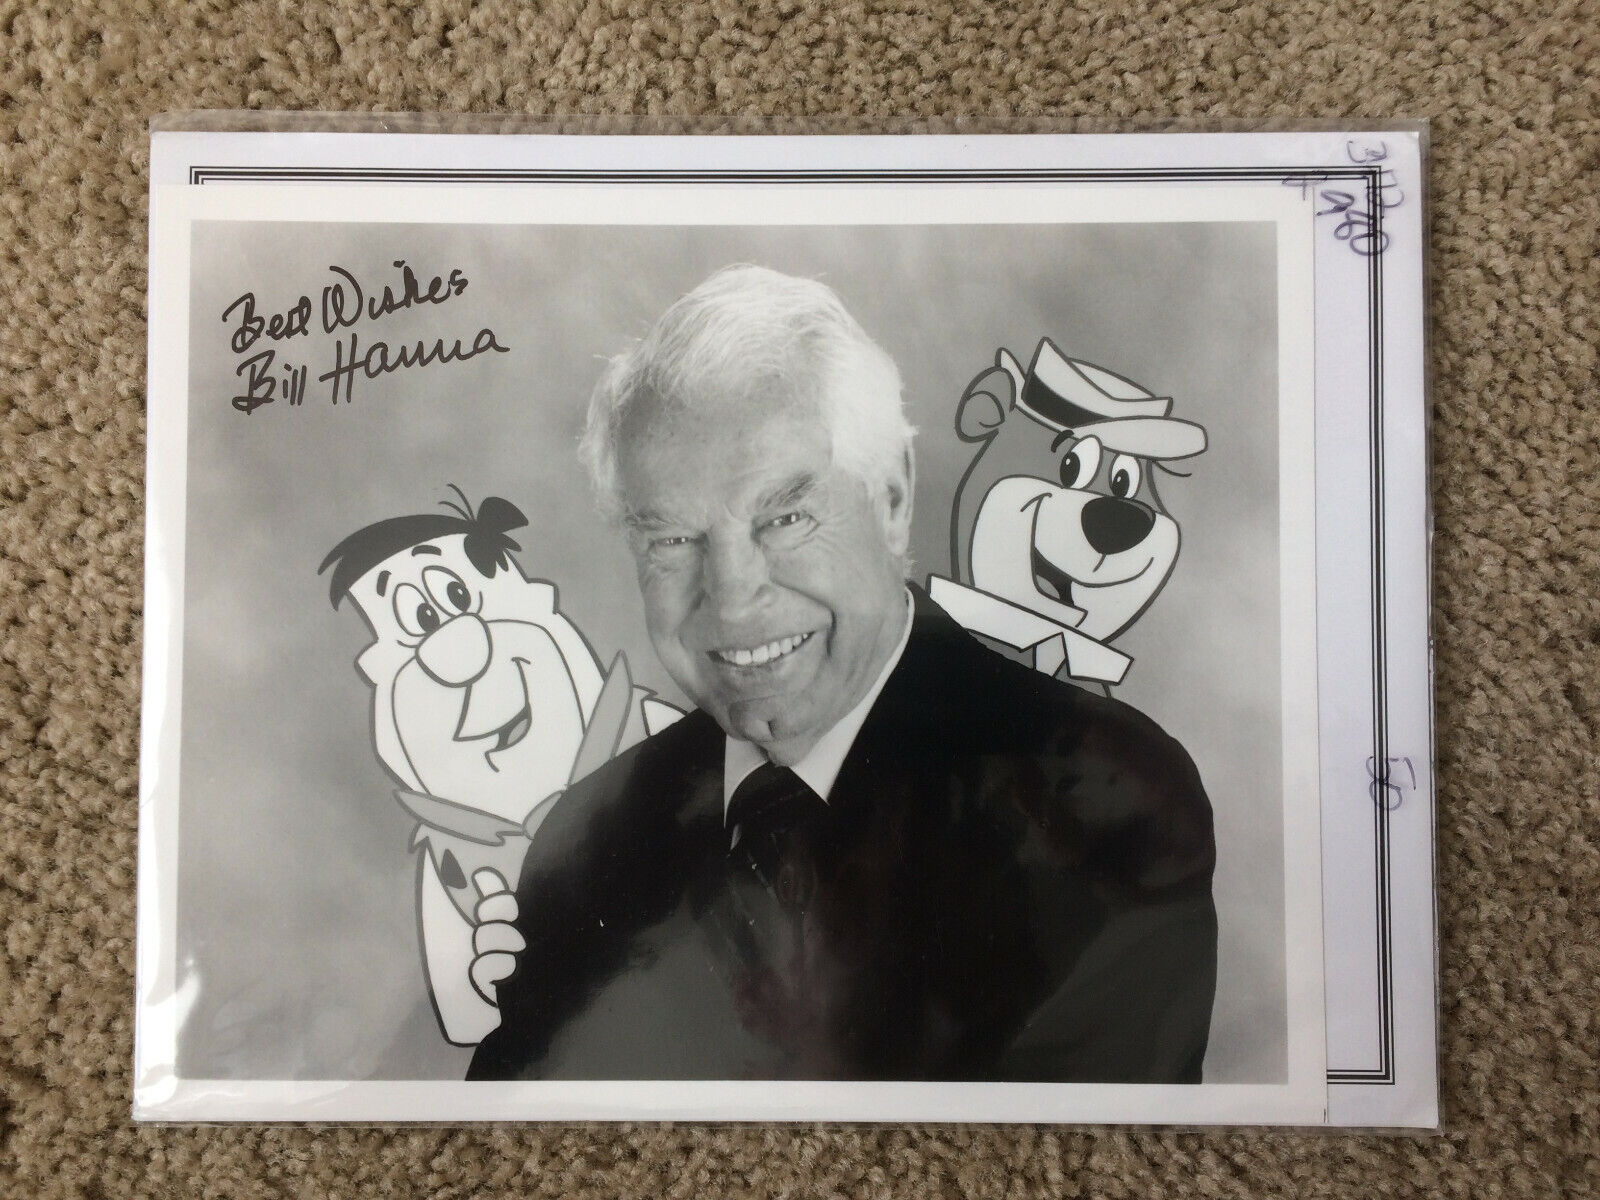 Bill Hanna Glossy Signed Photograph with certificate - new in package